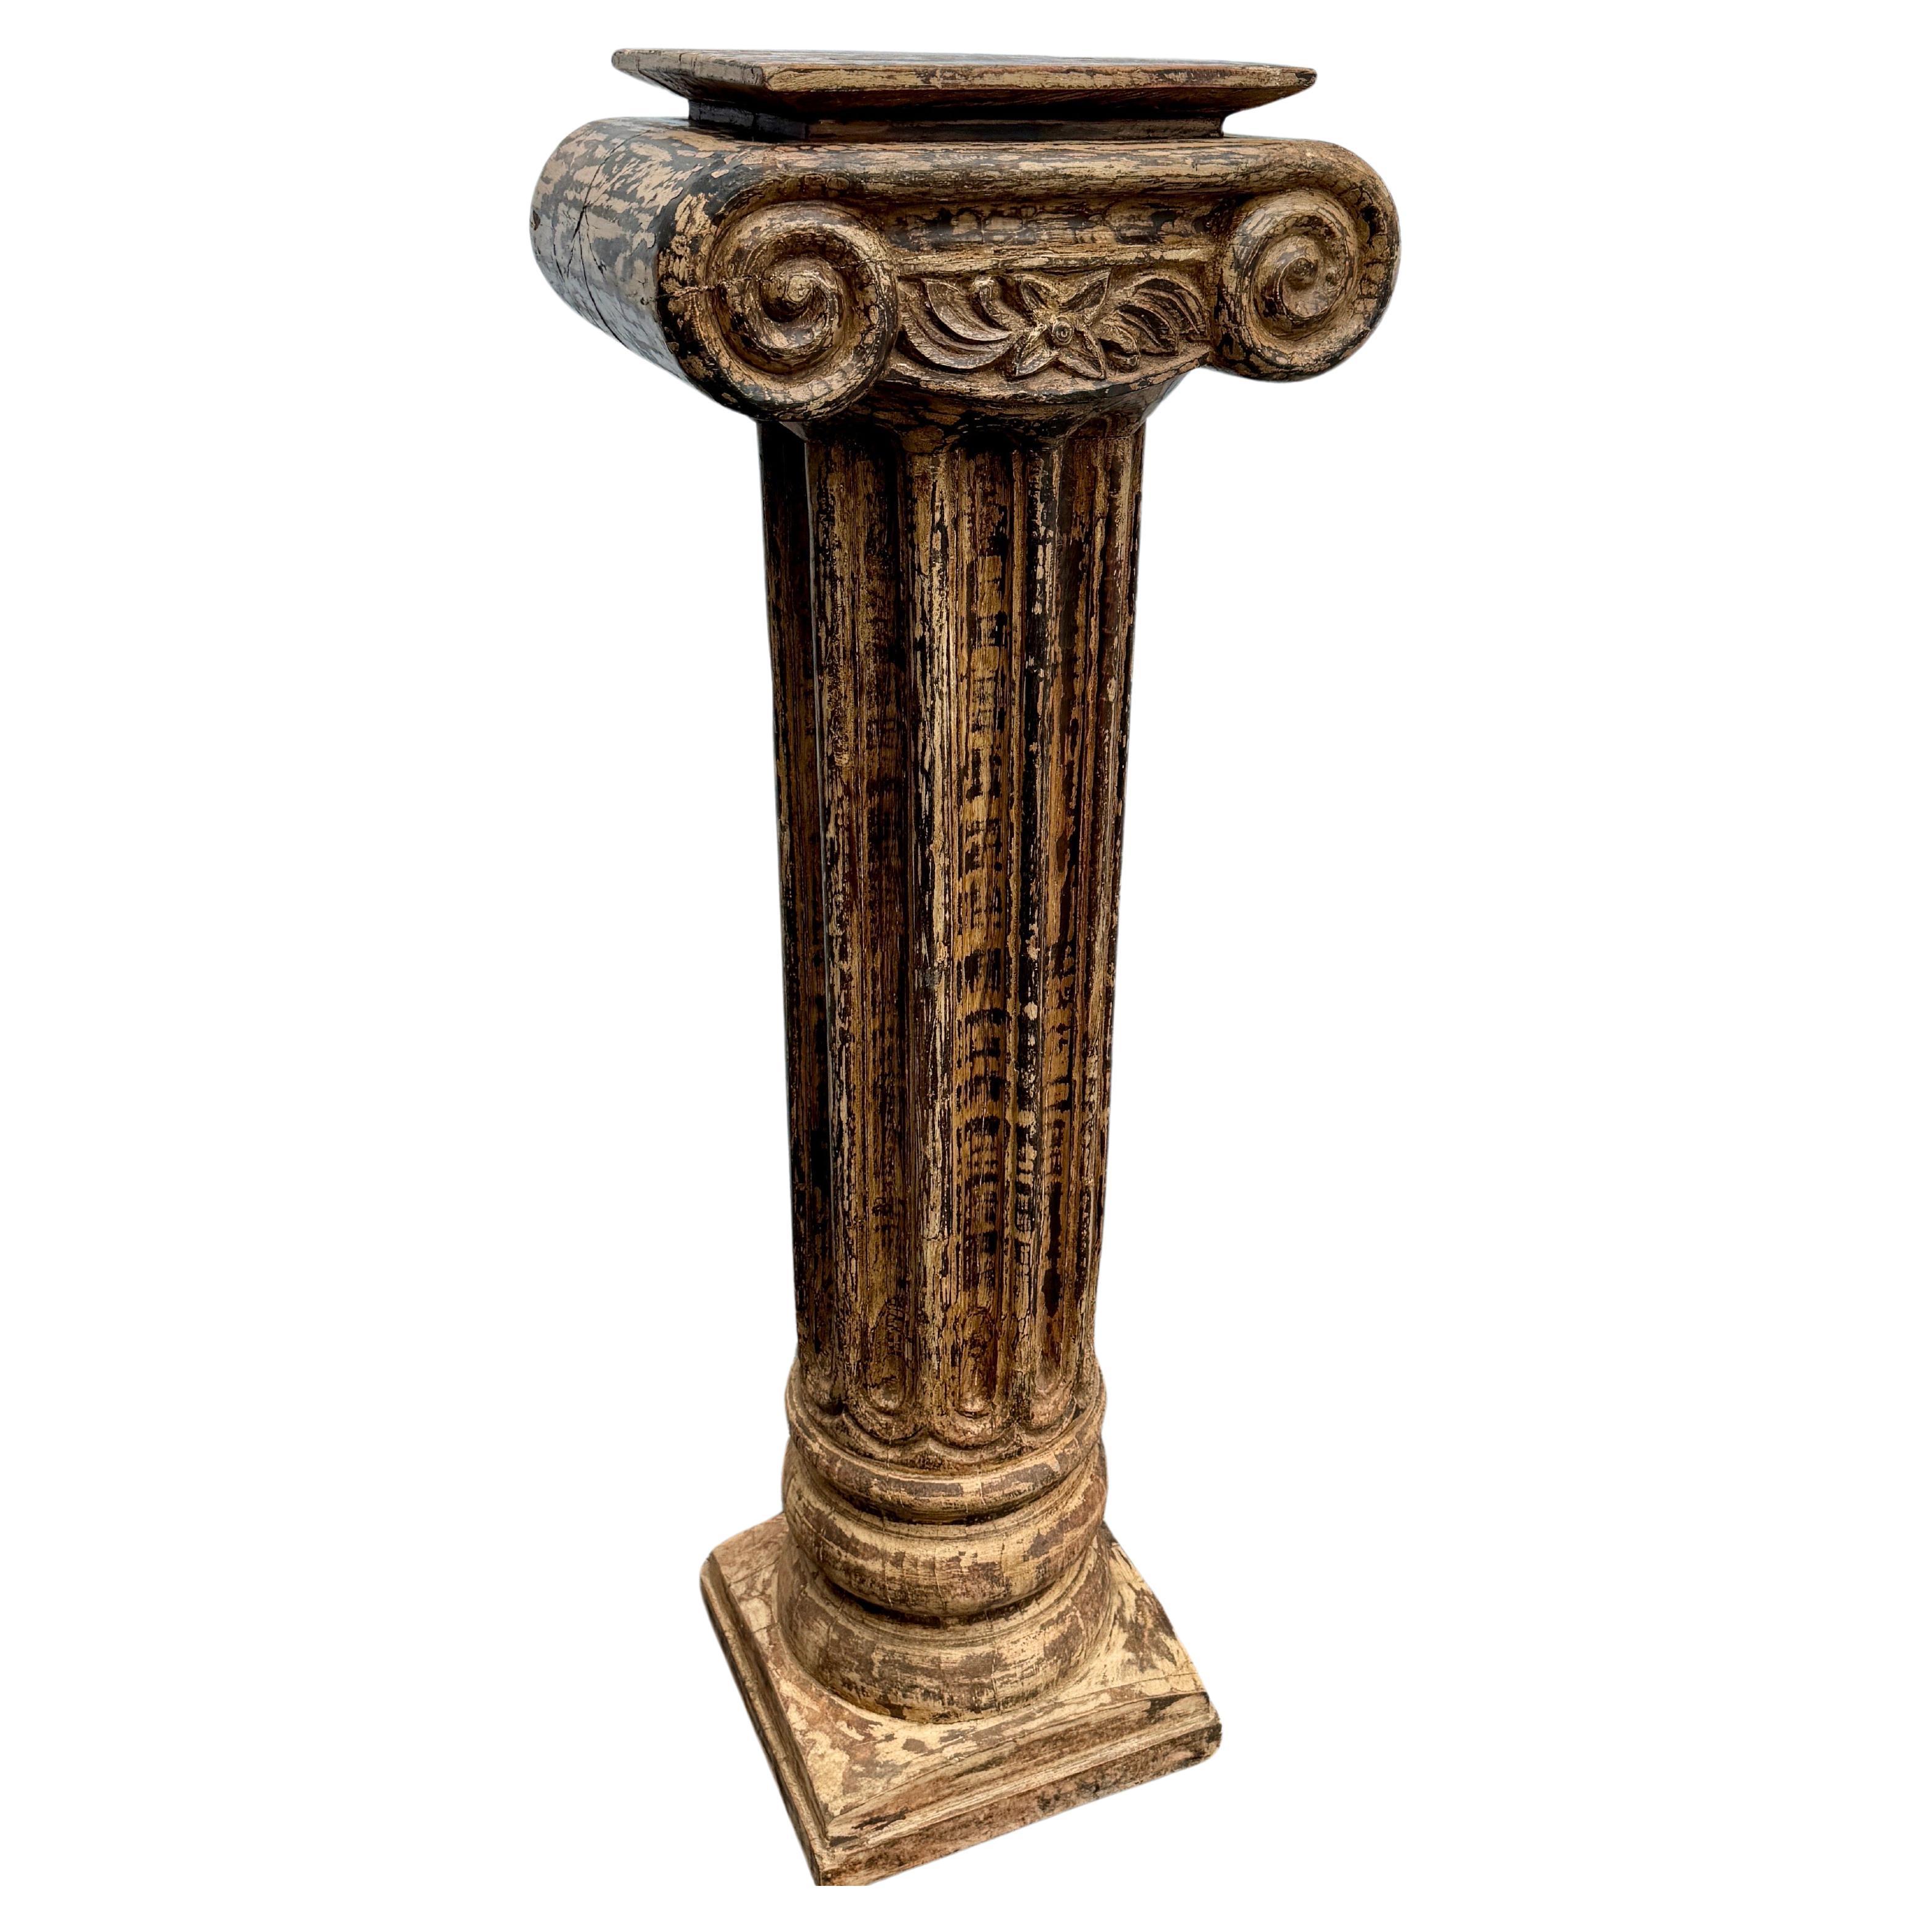 Bring a touch of classical architecture into your home with this impressive Corinthian Column Pedestal. This classic column style stand features wood on all sides. Certainly makes a wonderful addition to any home seeking a display piece in an